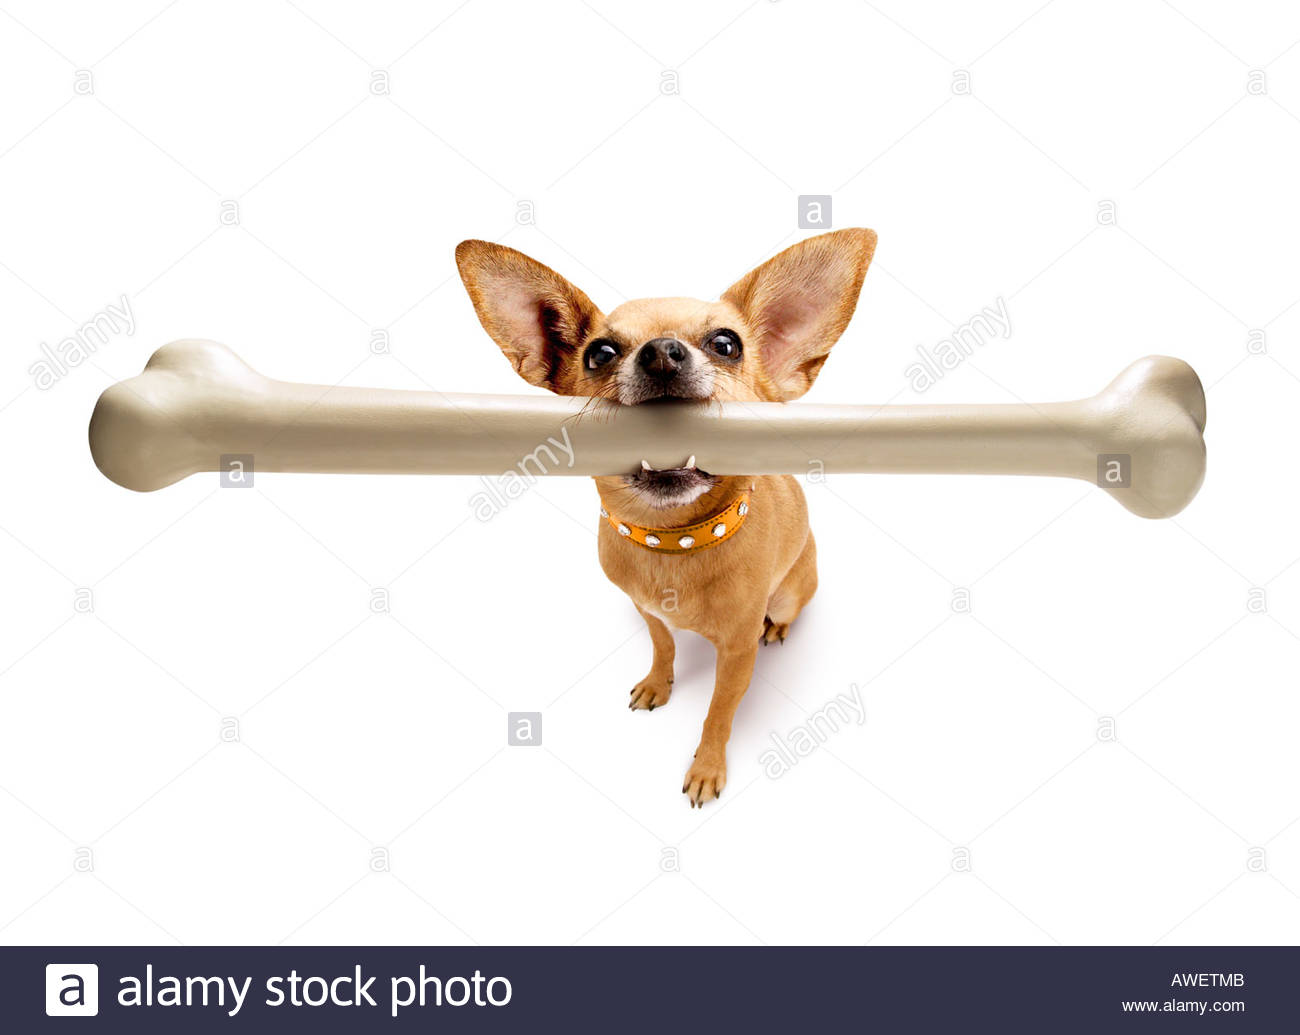 small-chihuahua-dog-holding-a-very-large